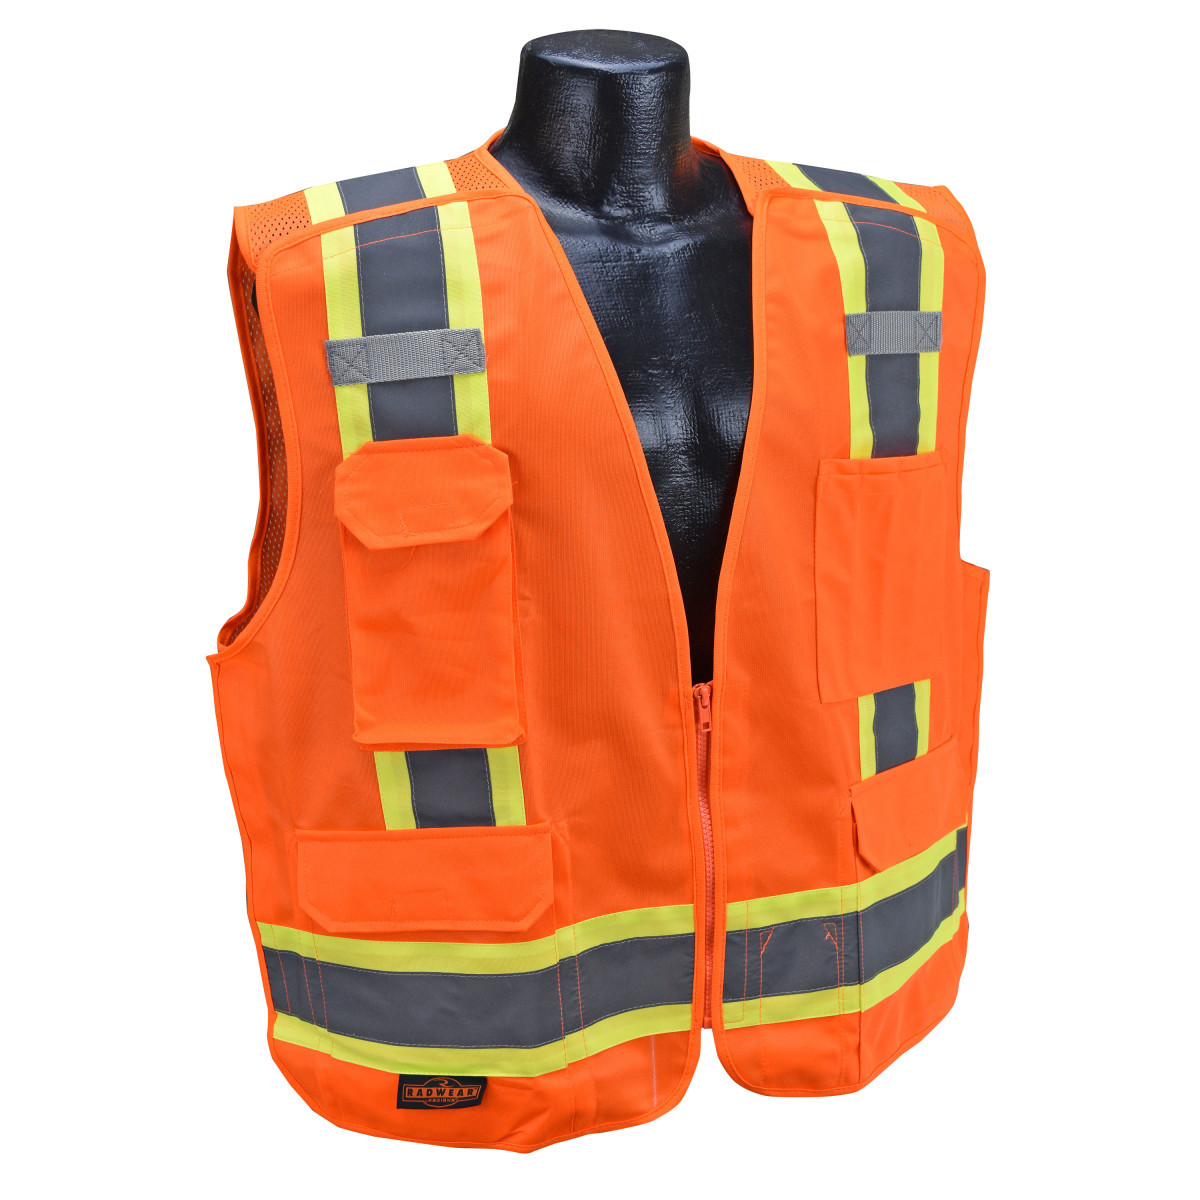 shop radians safety products and equipment online at autumn supply